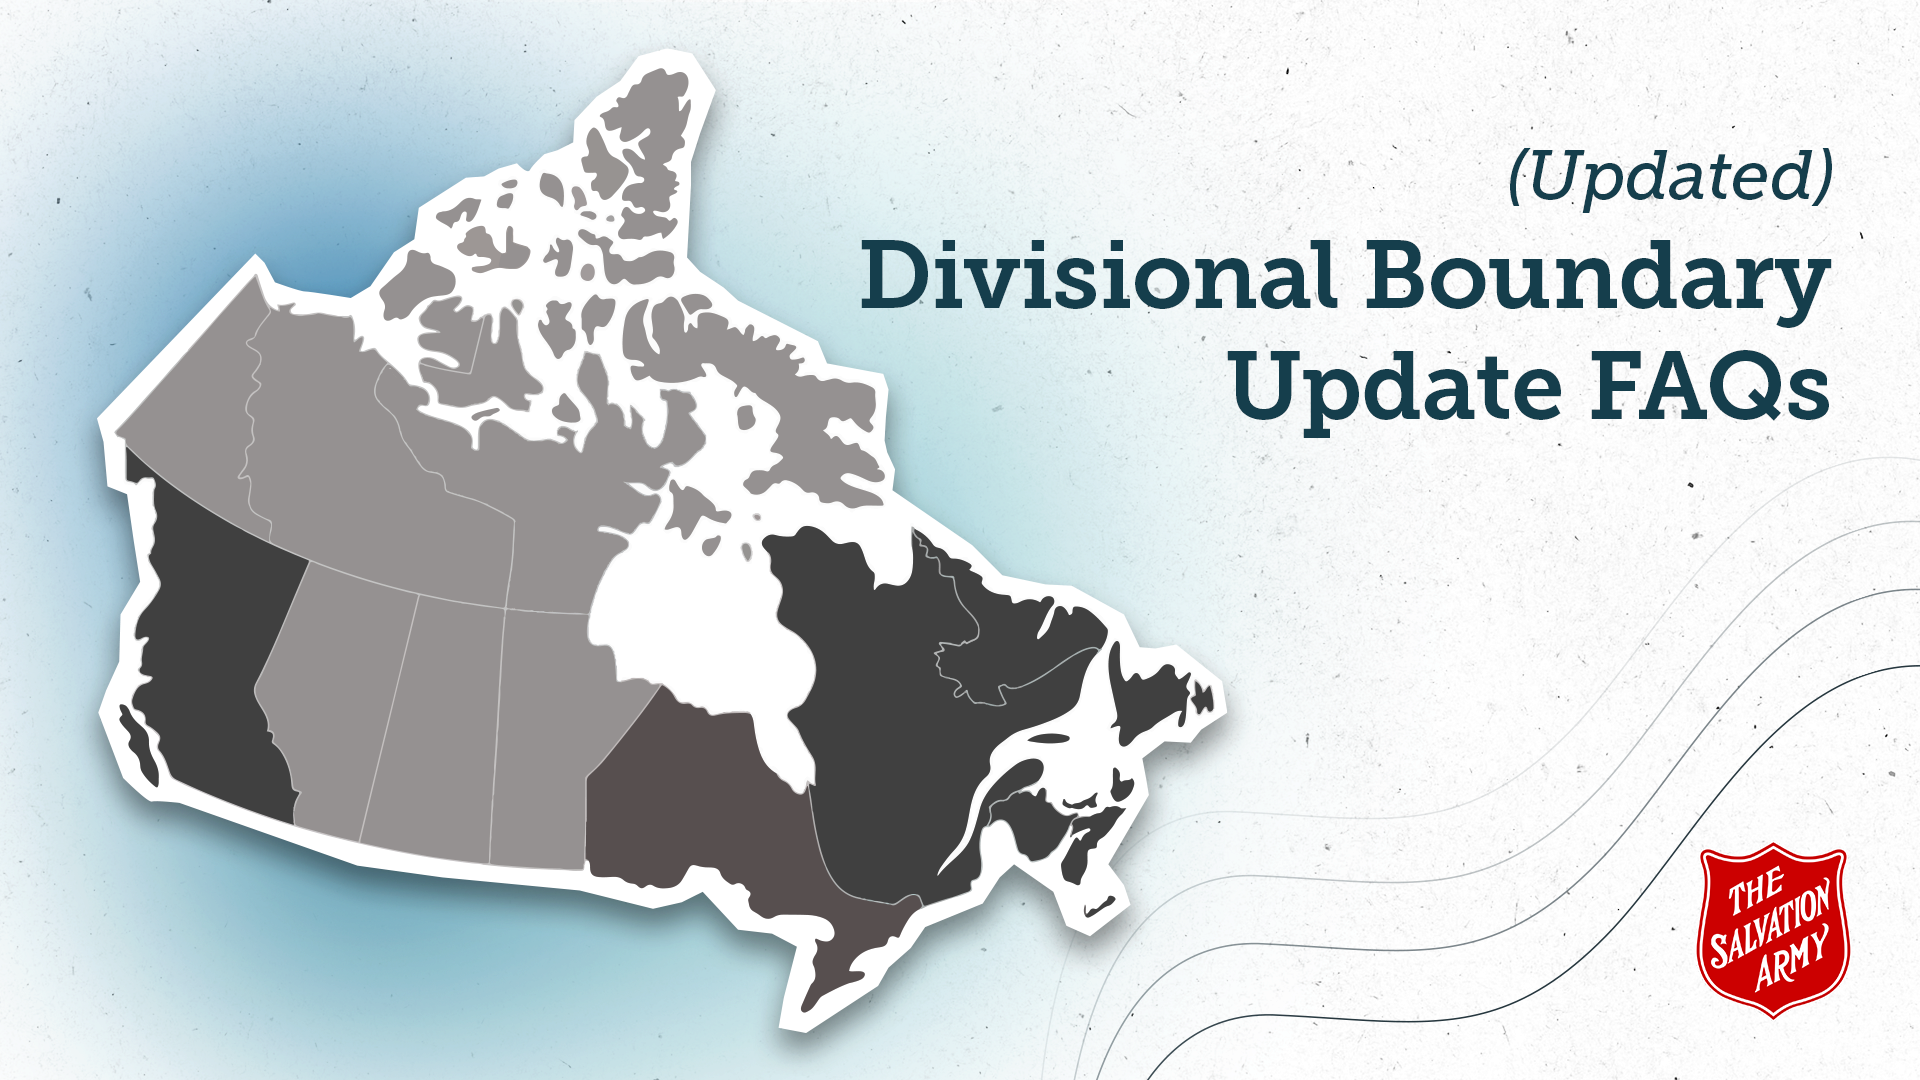 Updated Divisional Boundary Update FAQs